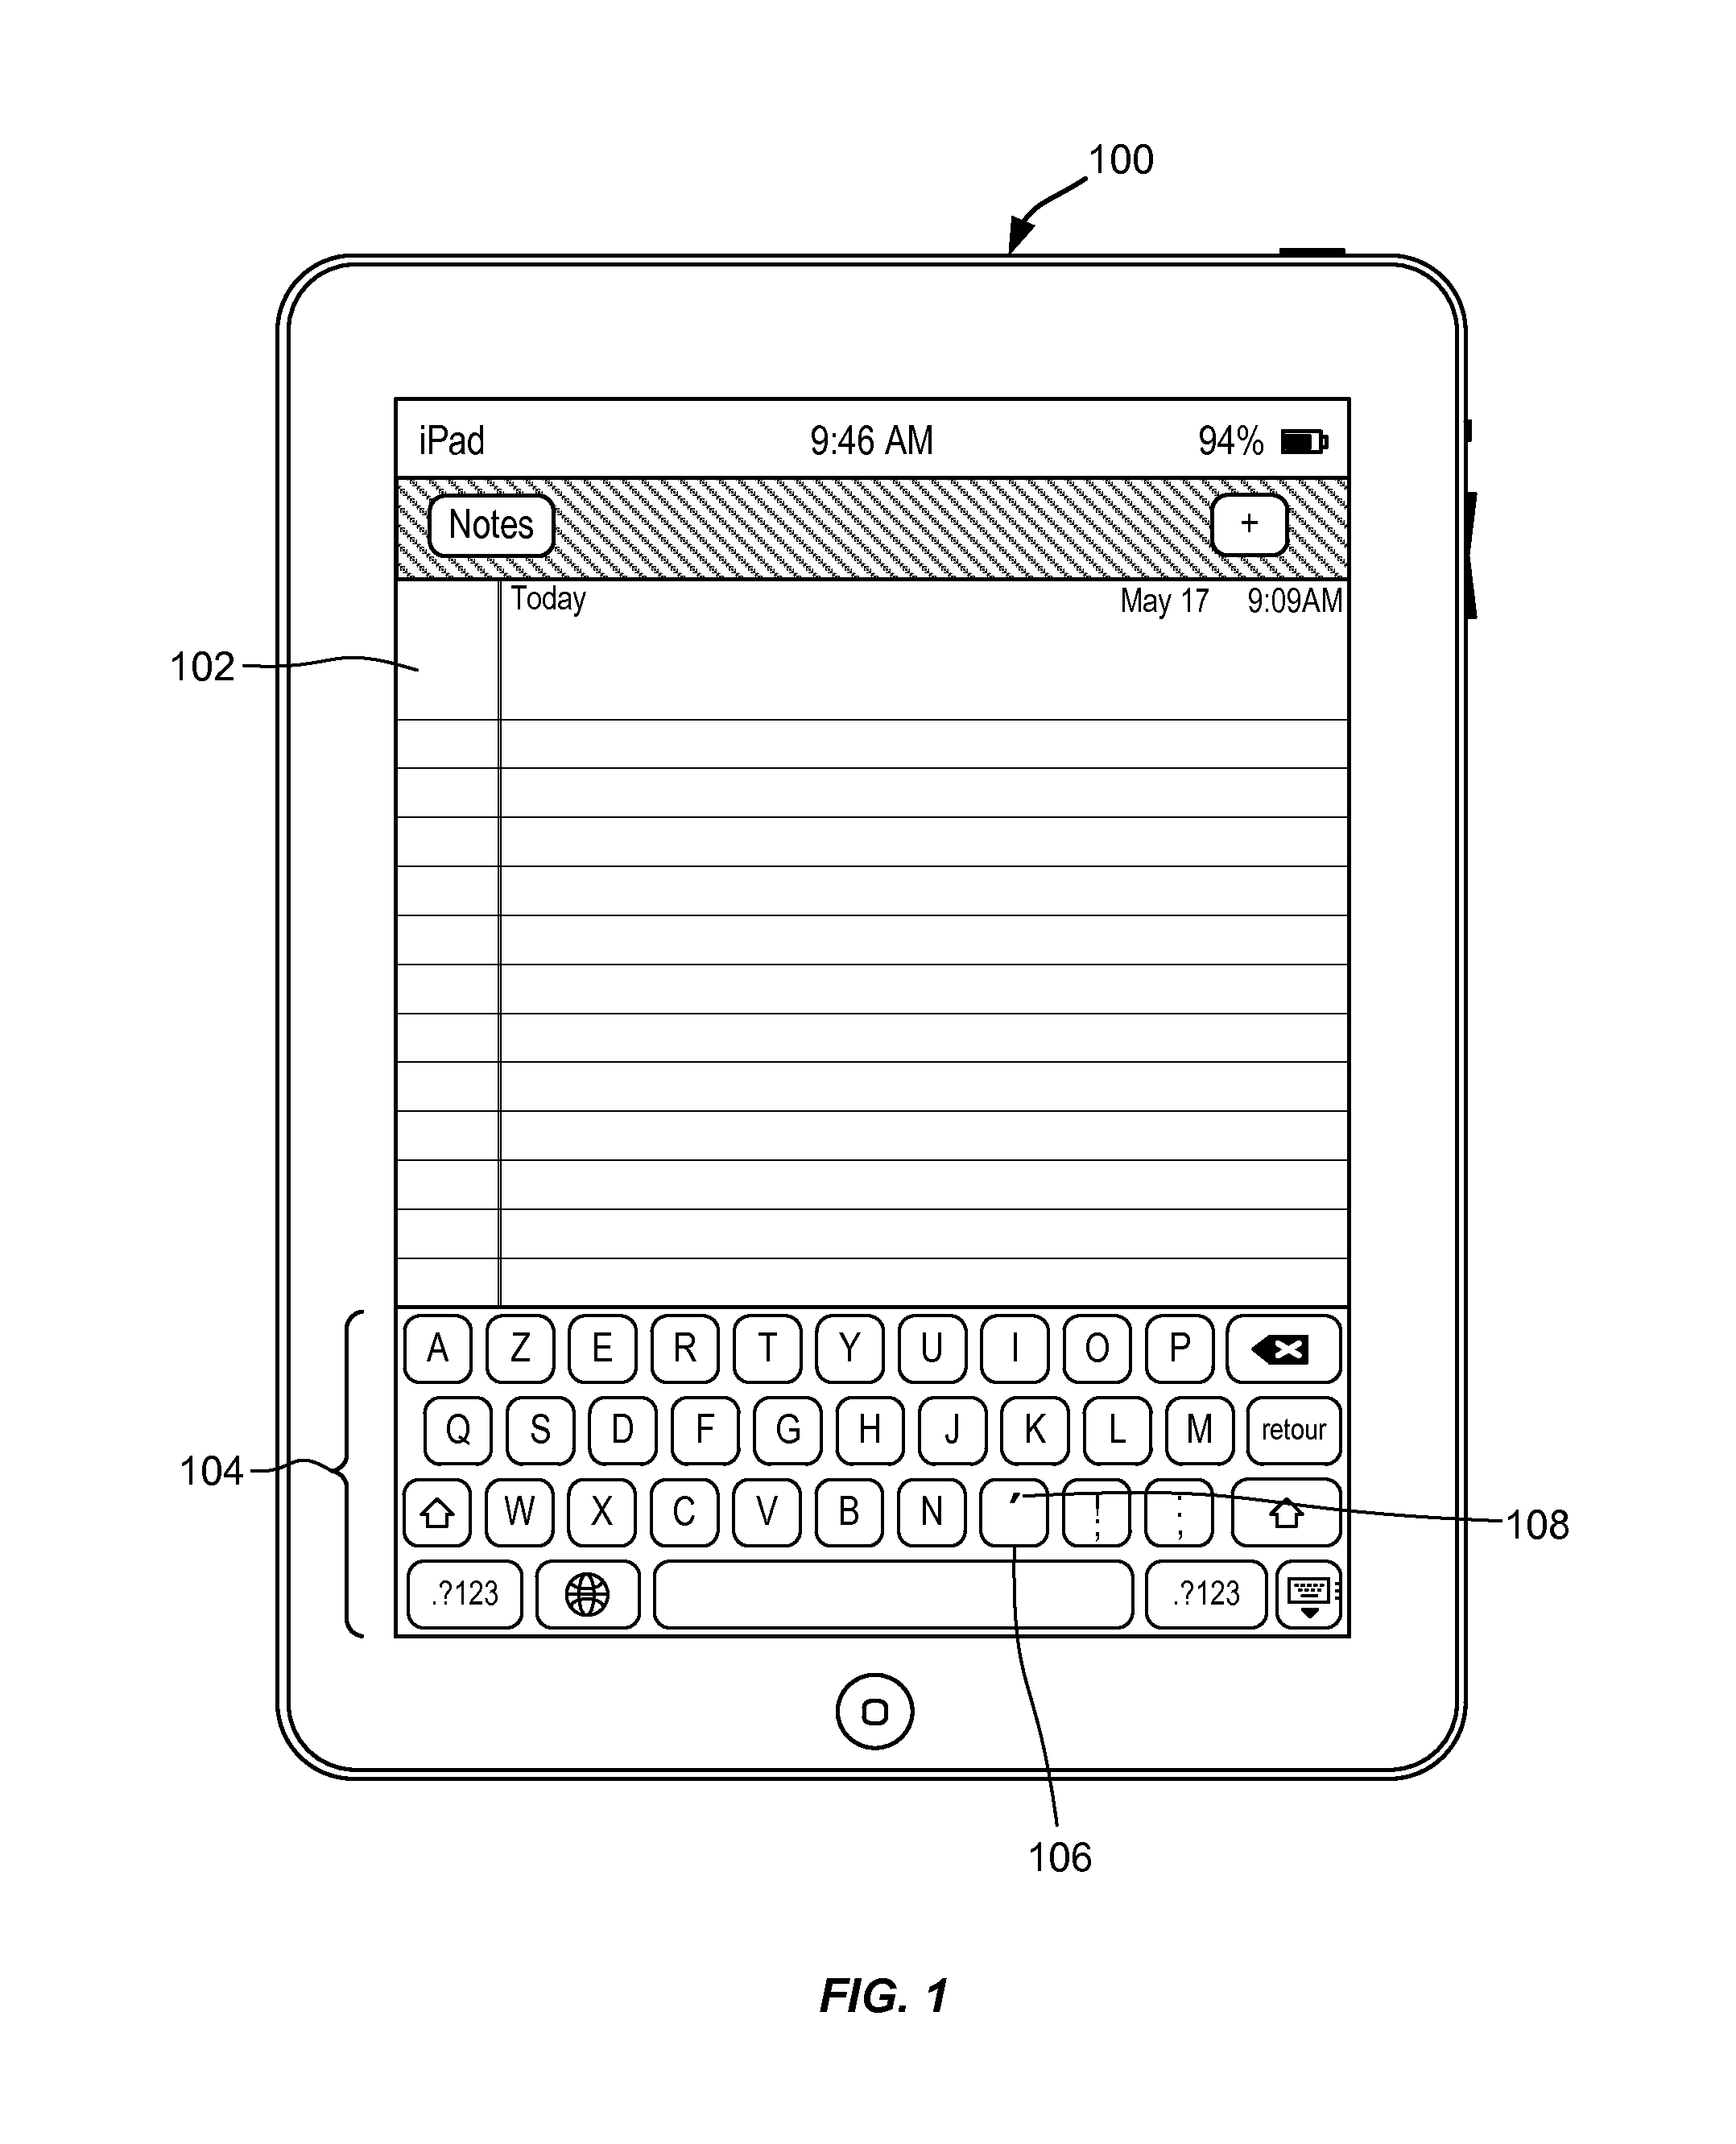 Dynamically changing a character associated with a key of a keyboard